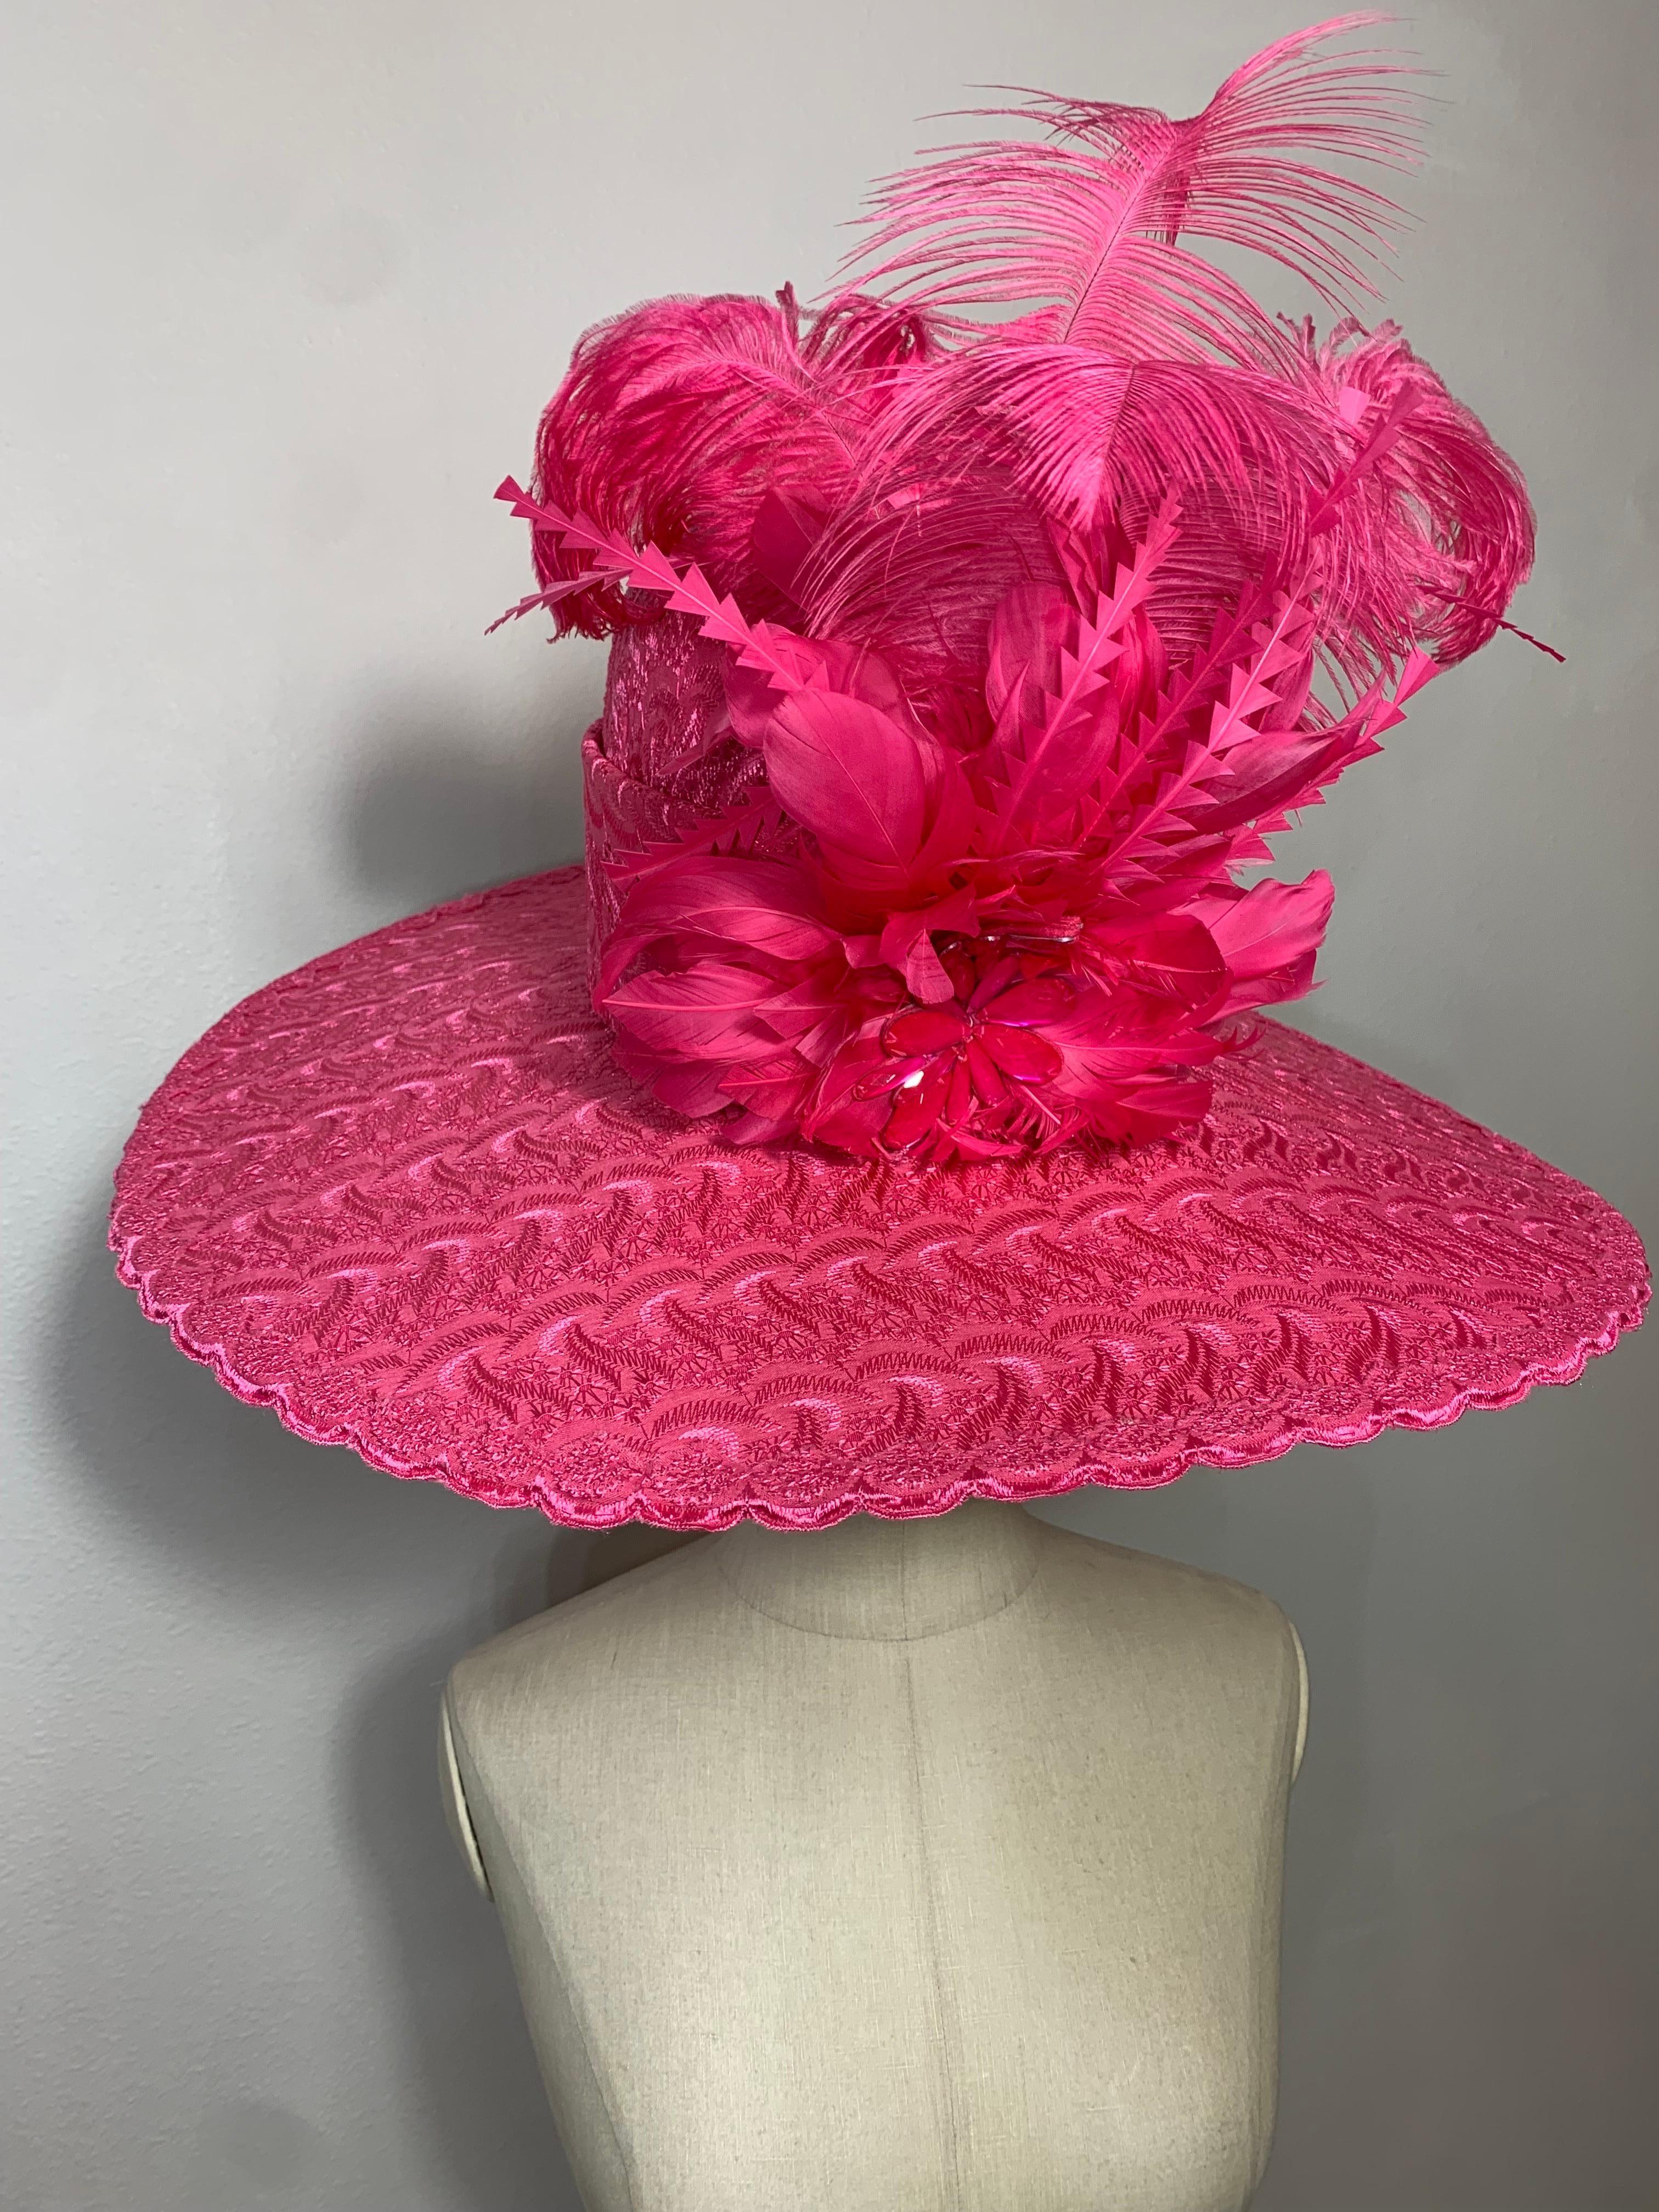 Custom-Made Brilliant Pink Embroidered Cotton Eyelet Wide-Brimmed Hat w Feathers In Excellent Condition For Sale In Gresham, OR